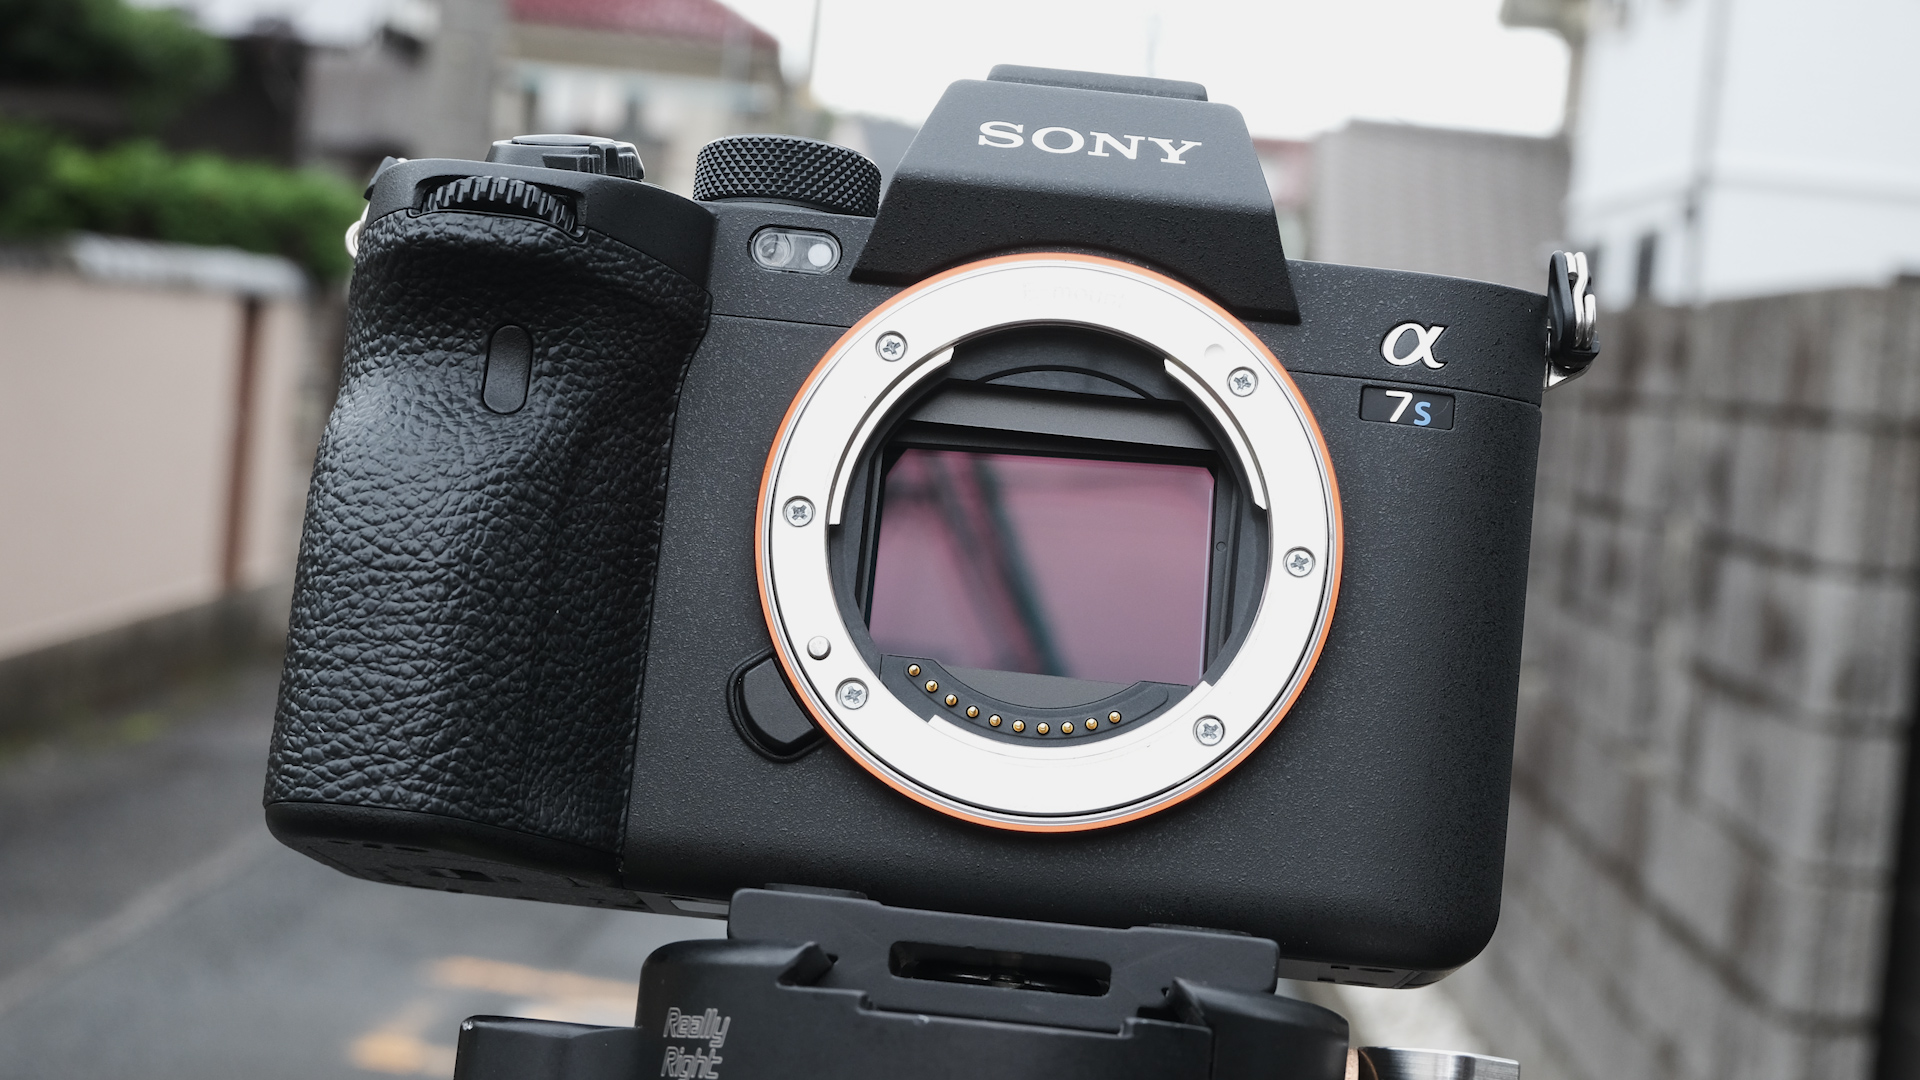 Sony a7S III Review - Mini Documentary and Lowlight Sample | CineD